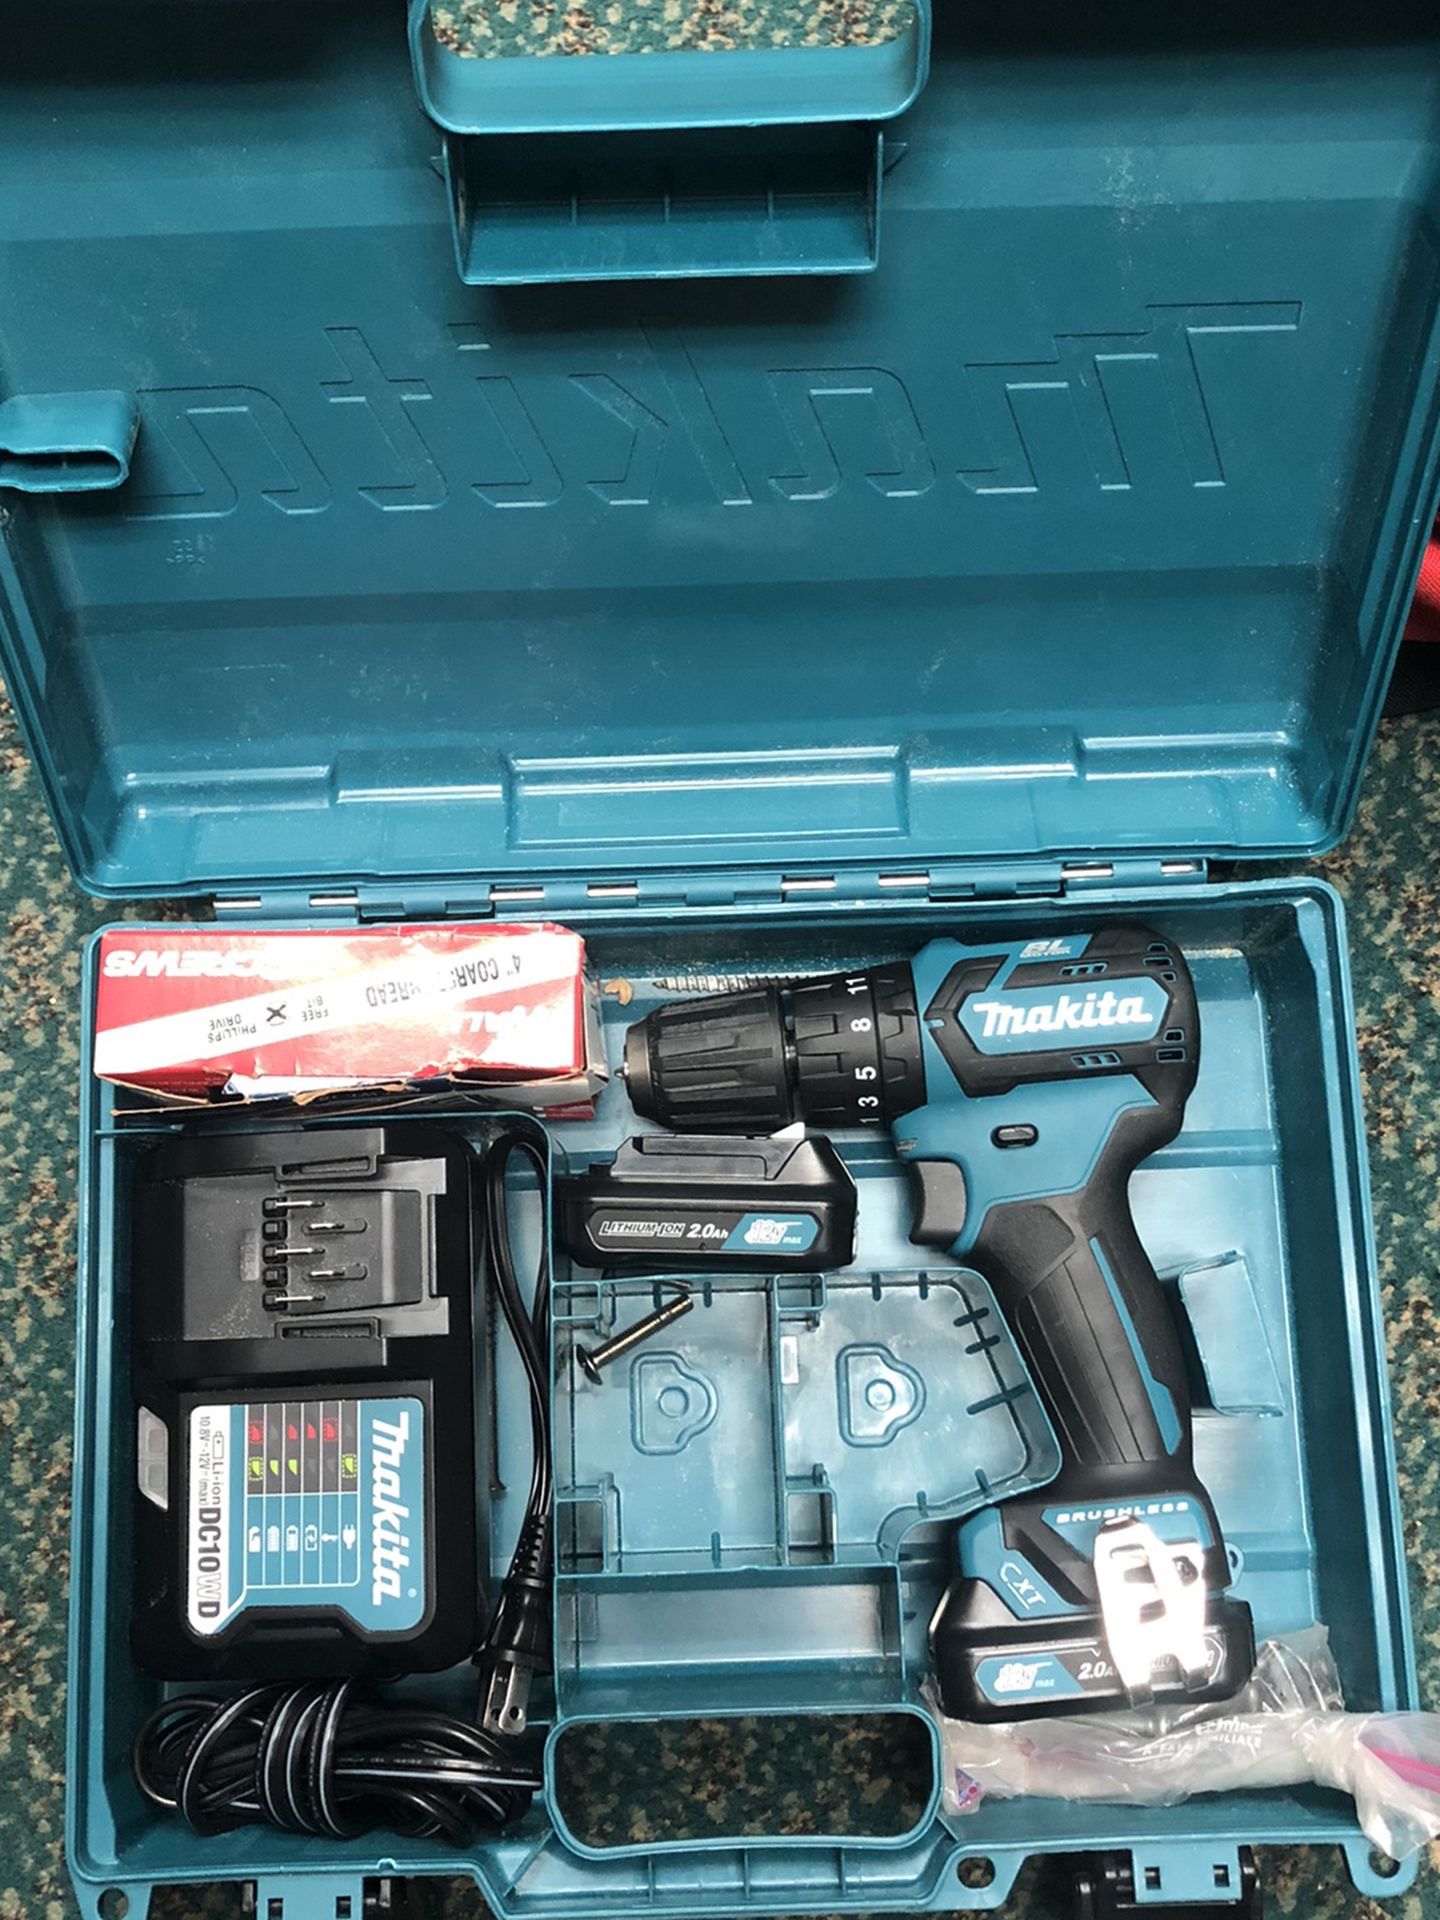 Hammer Drill, Tools-Power Makita in Case 2 Batteries 12V W/ Charger